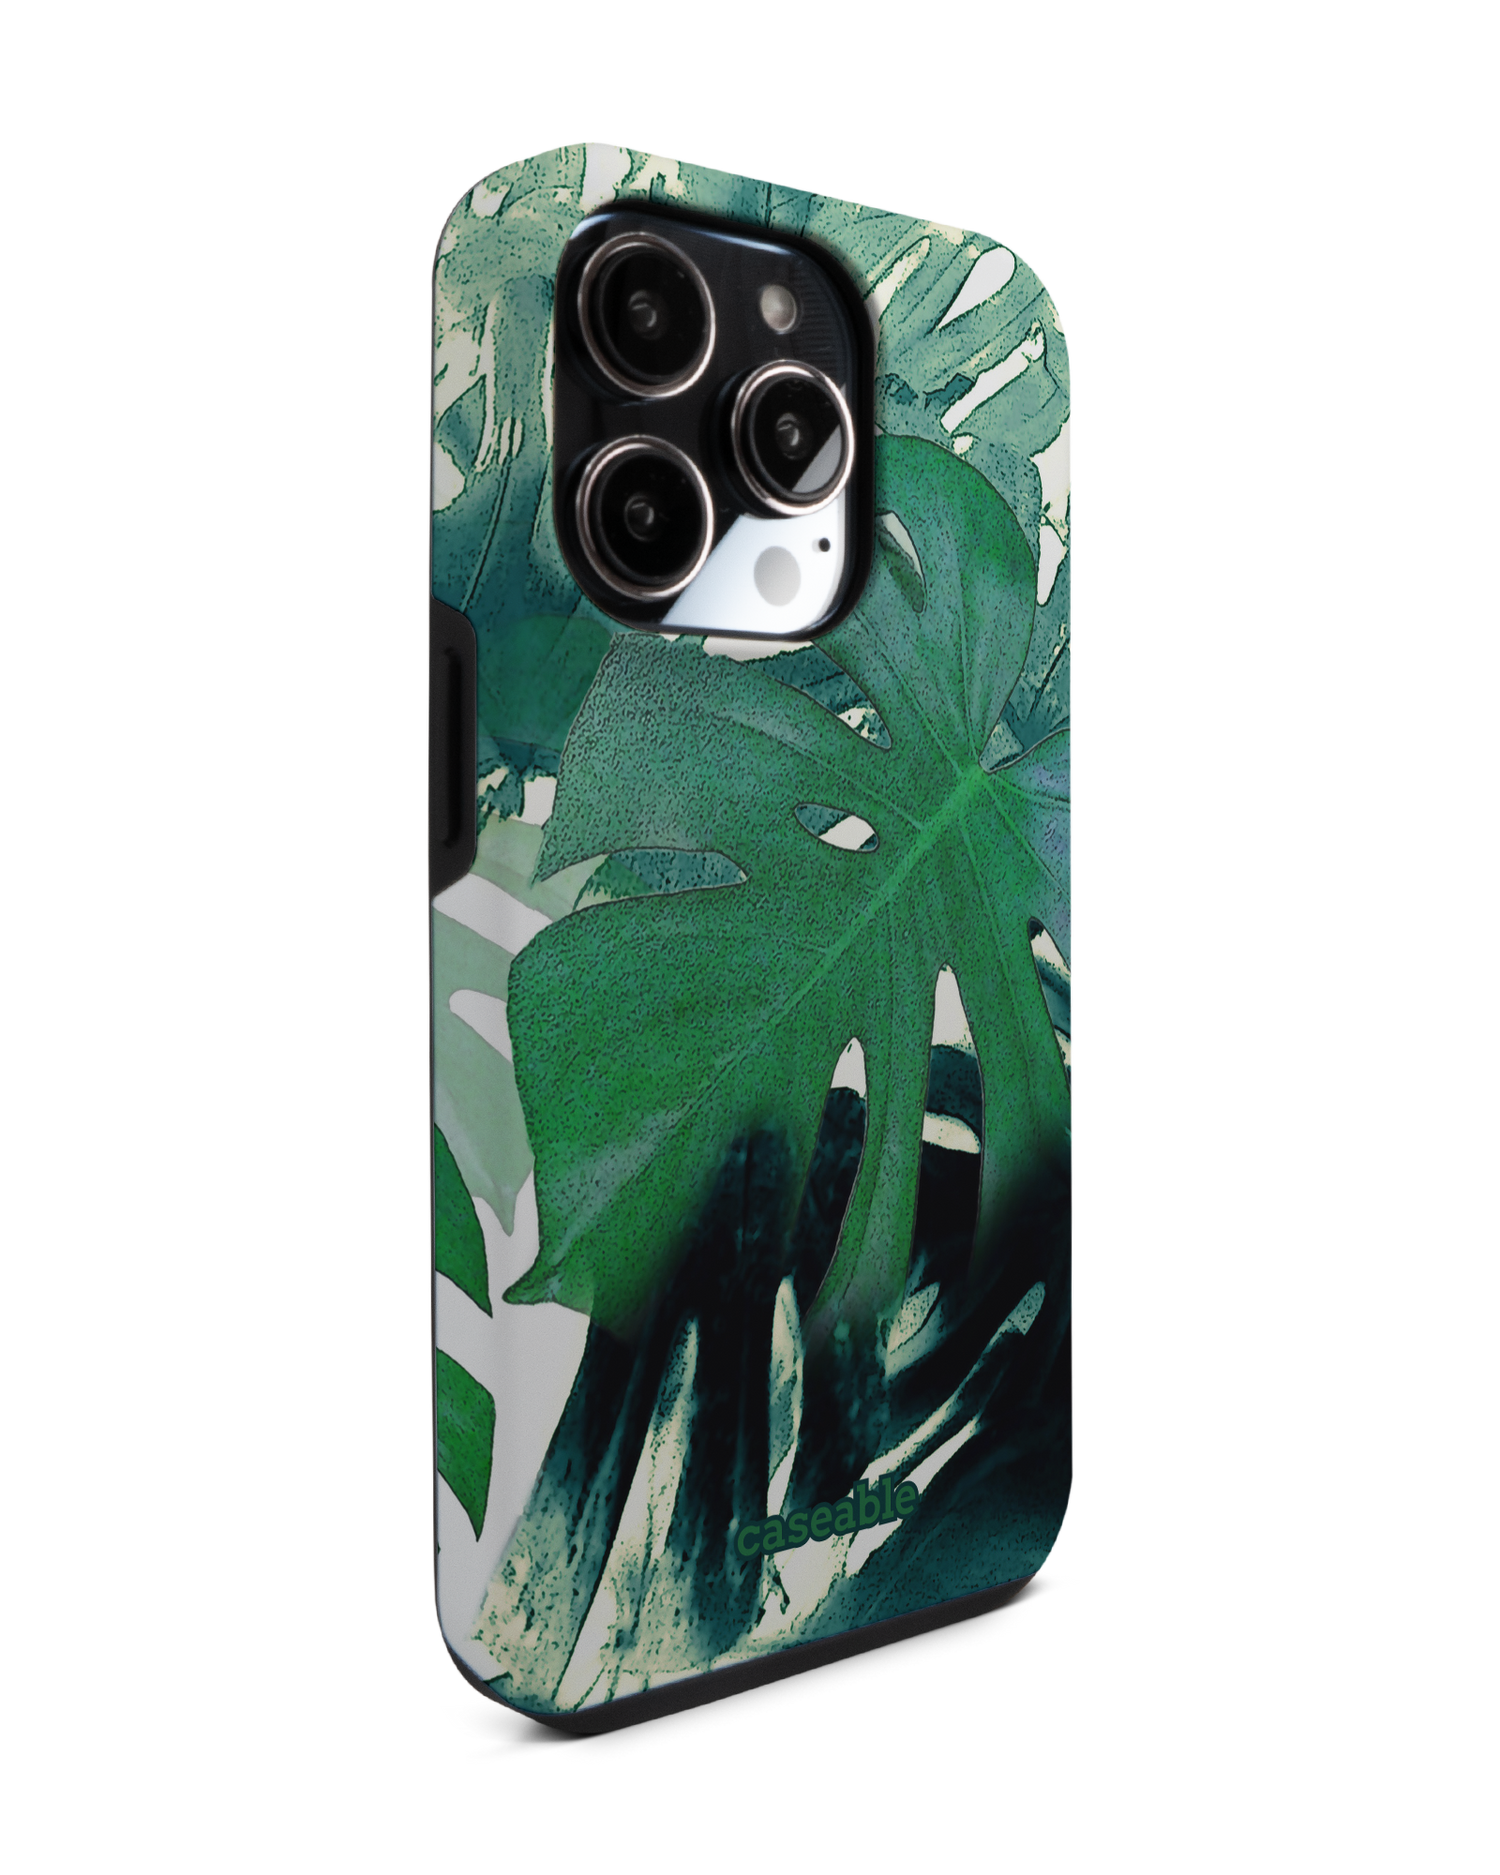 Saturated Plants Premium Phone Case for Apple iPhone 14 Pro: View from the left side